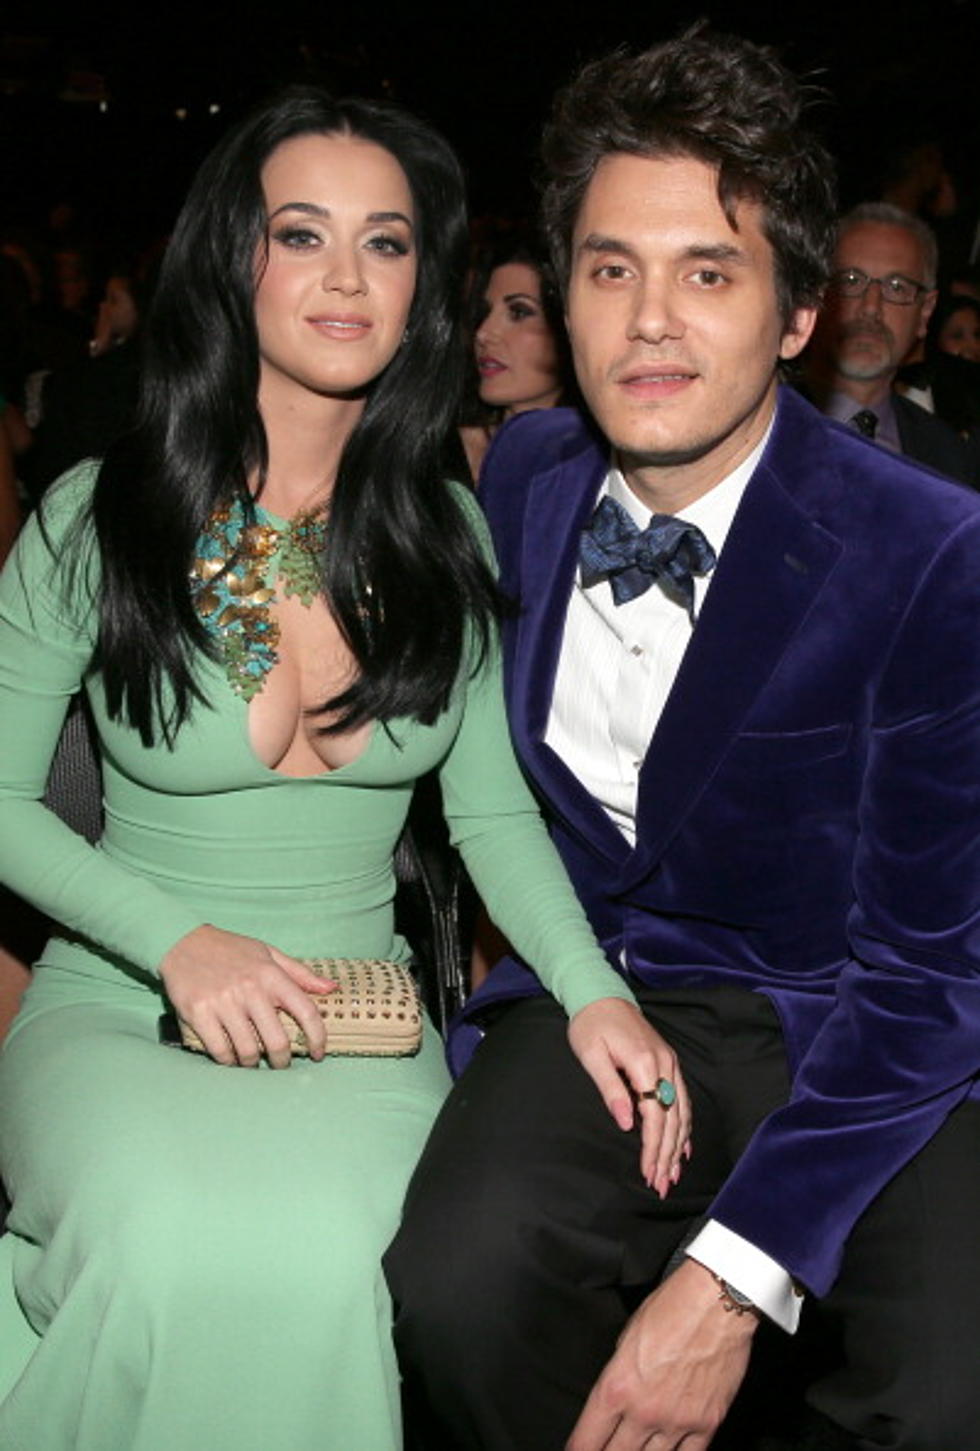 GOSSIP: Katy Perry And John Mayer Are Back Together Again